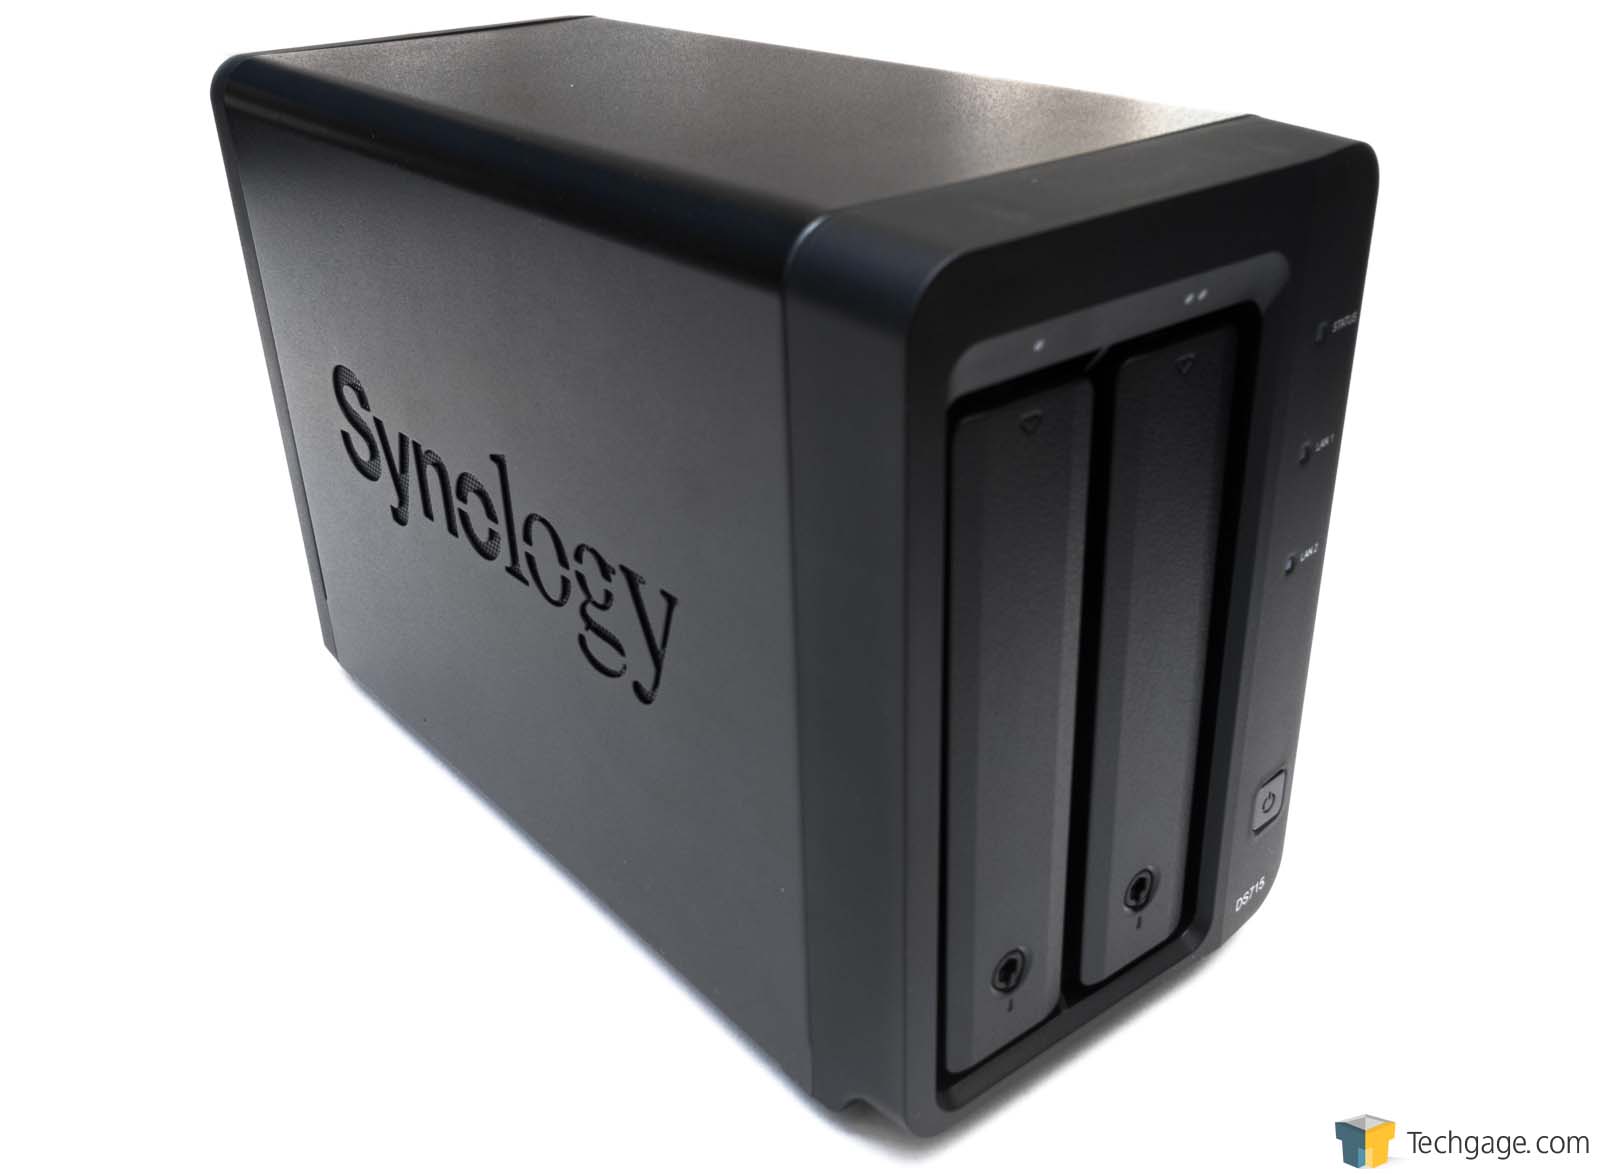 Synology DS715 DiskStation 2-Bay Business NAS Review – Techgage